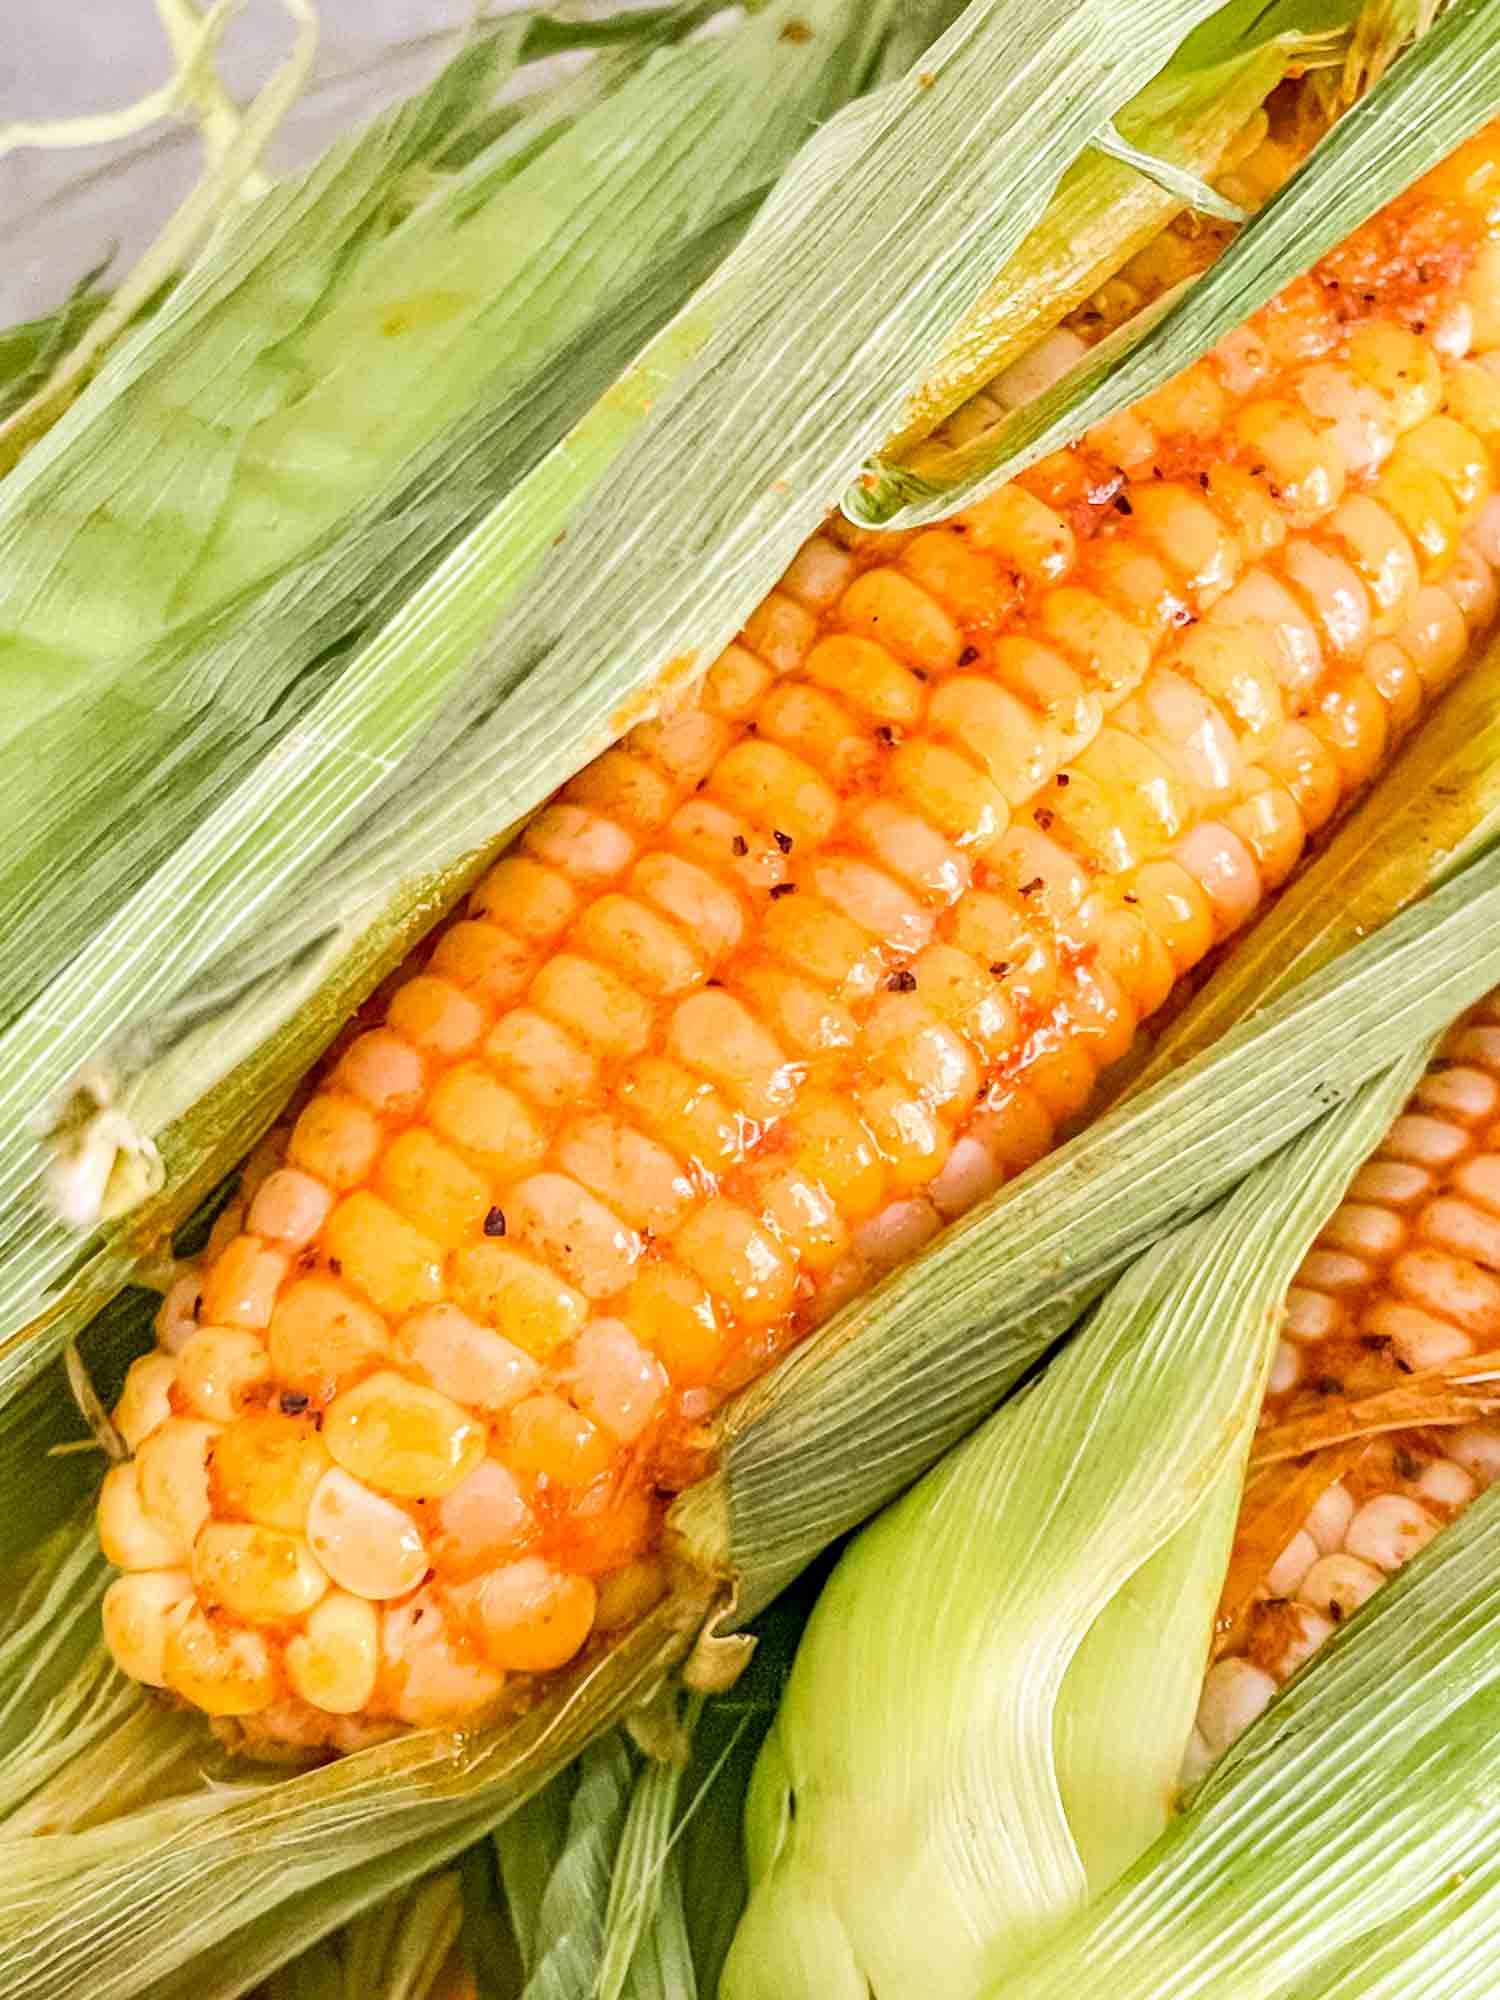 Close up of a Smoked Corn on the Cob in its husk